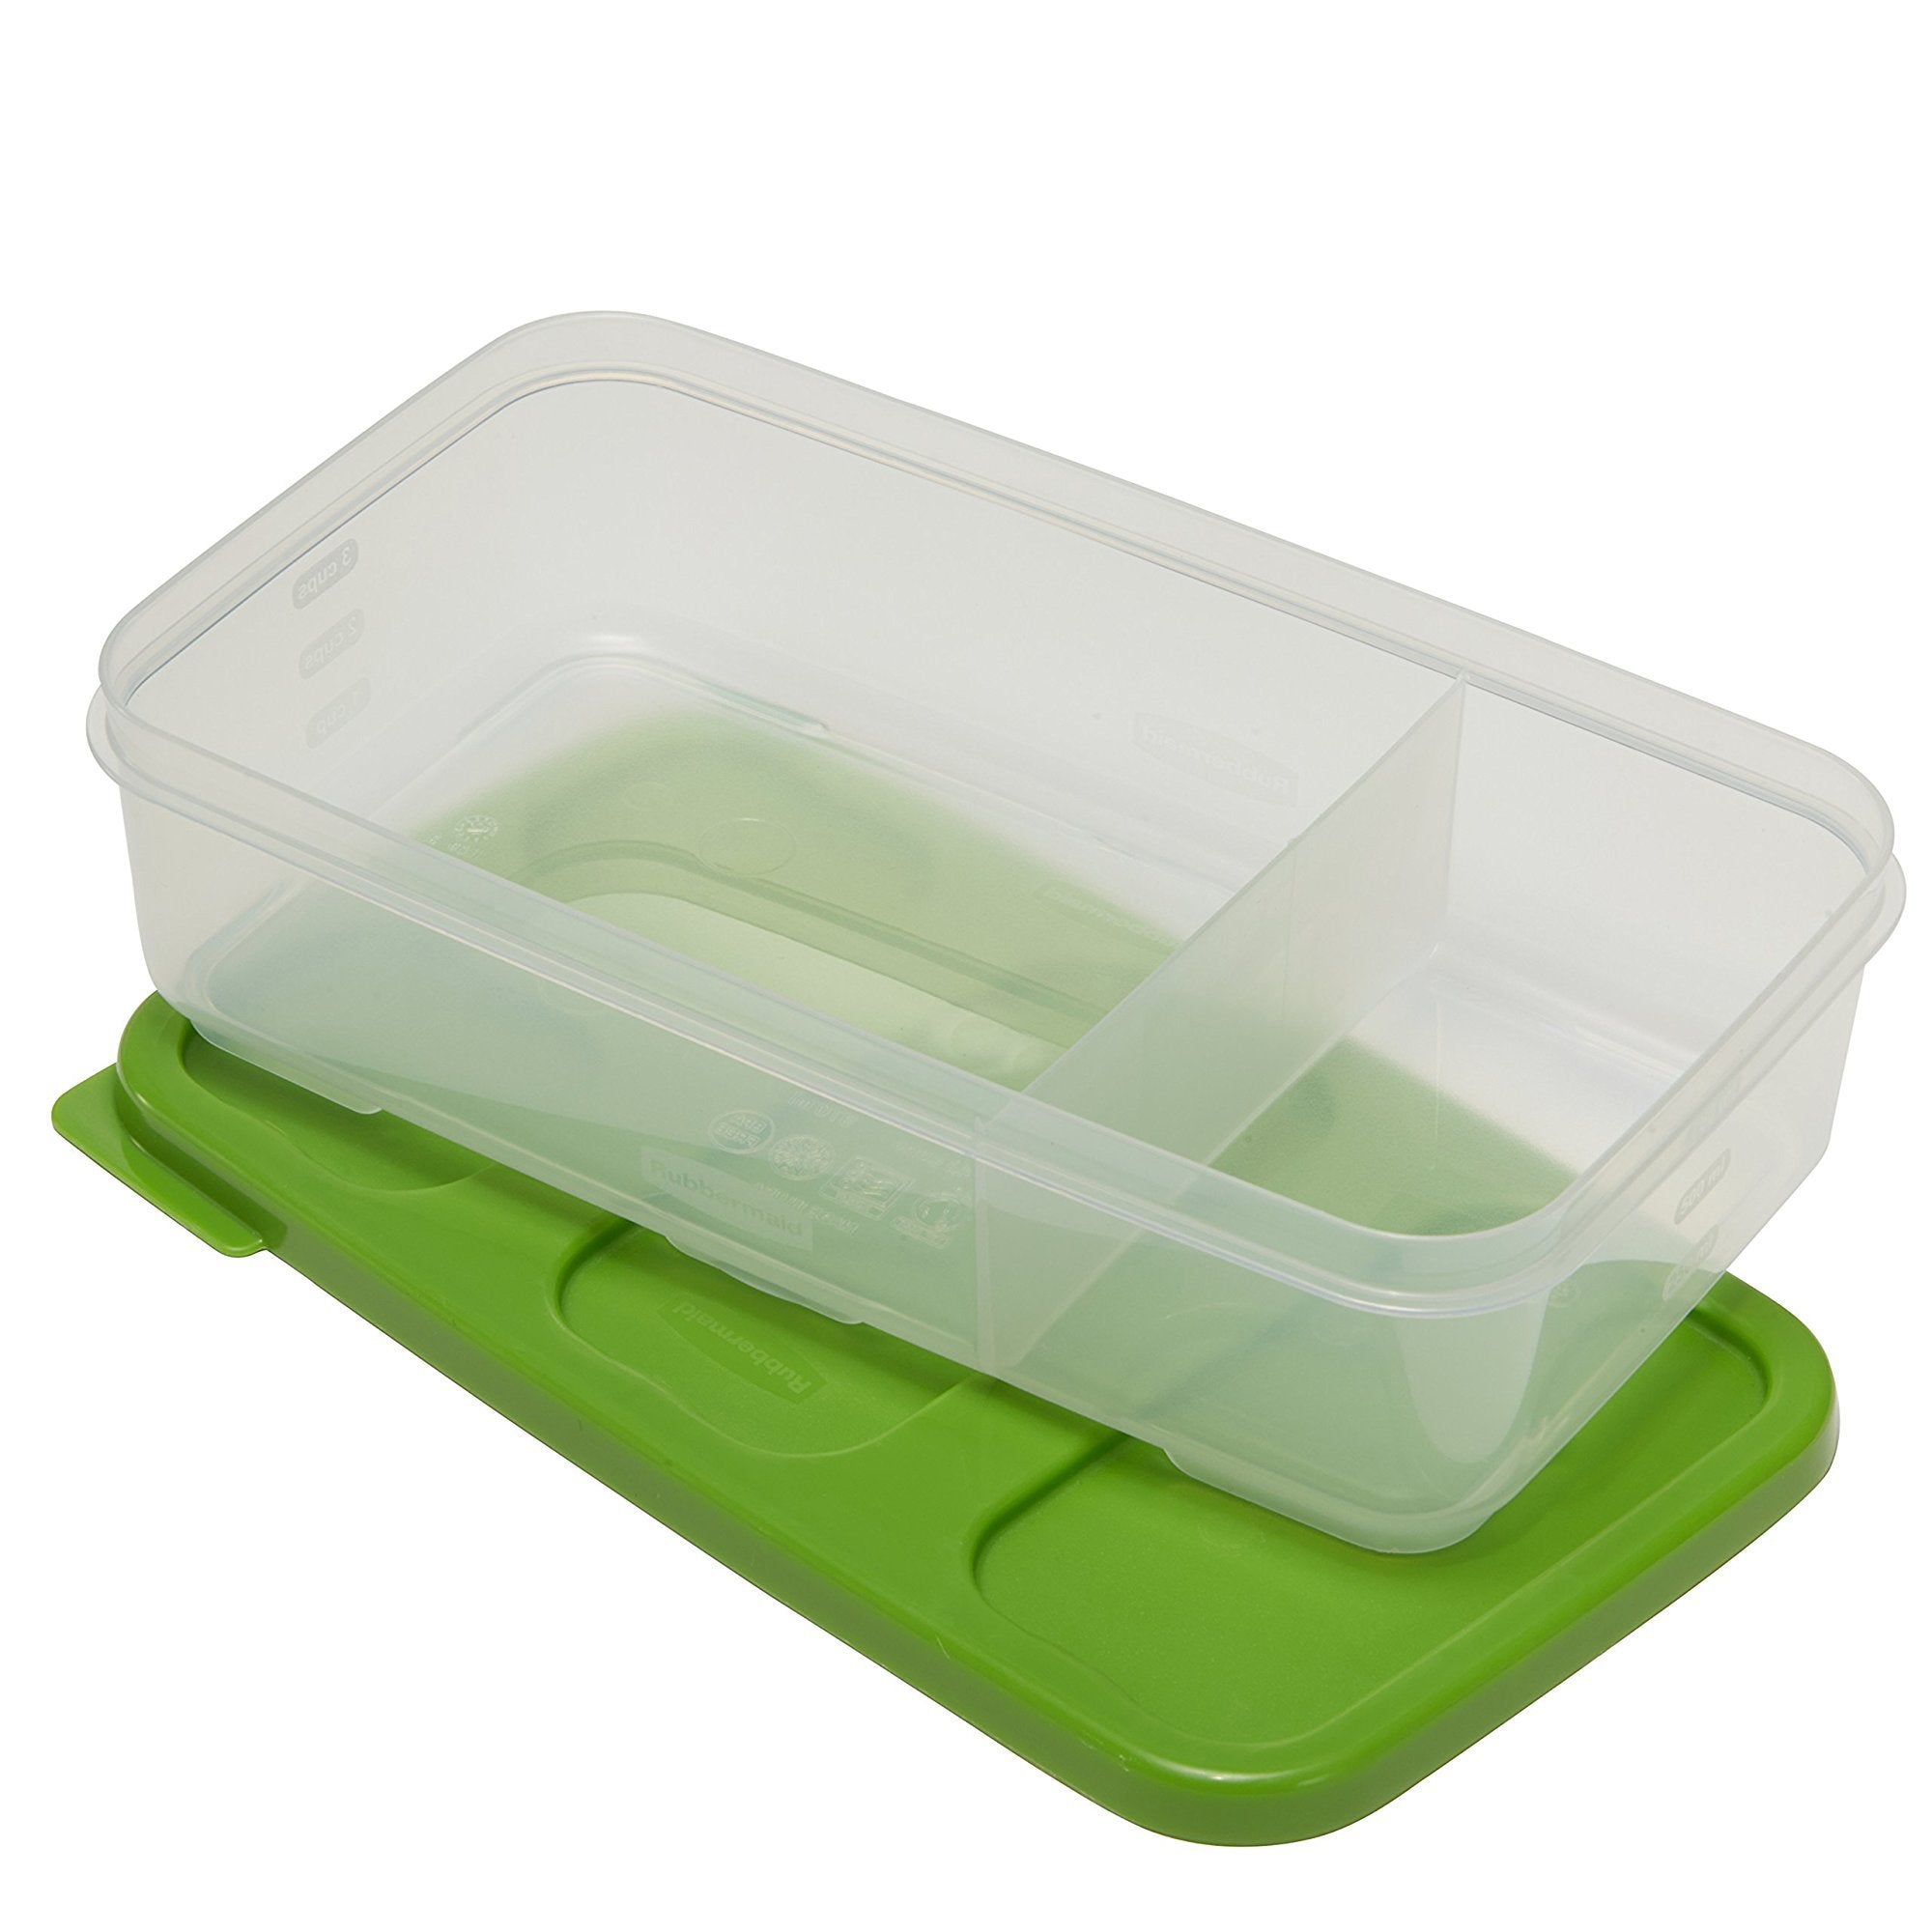 Rubbermaid Lunchblox Food Storage Container, 970 ml - Whole and All